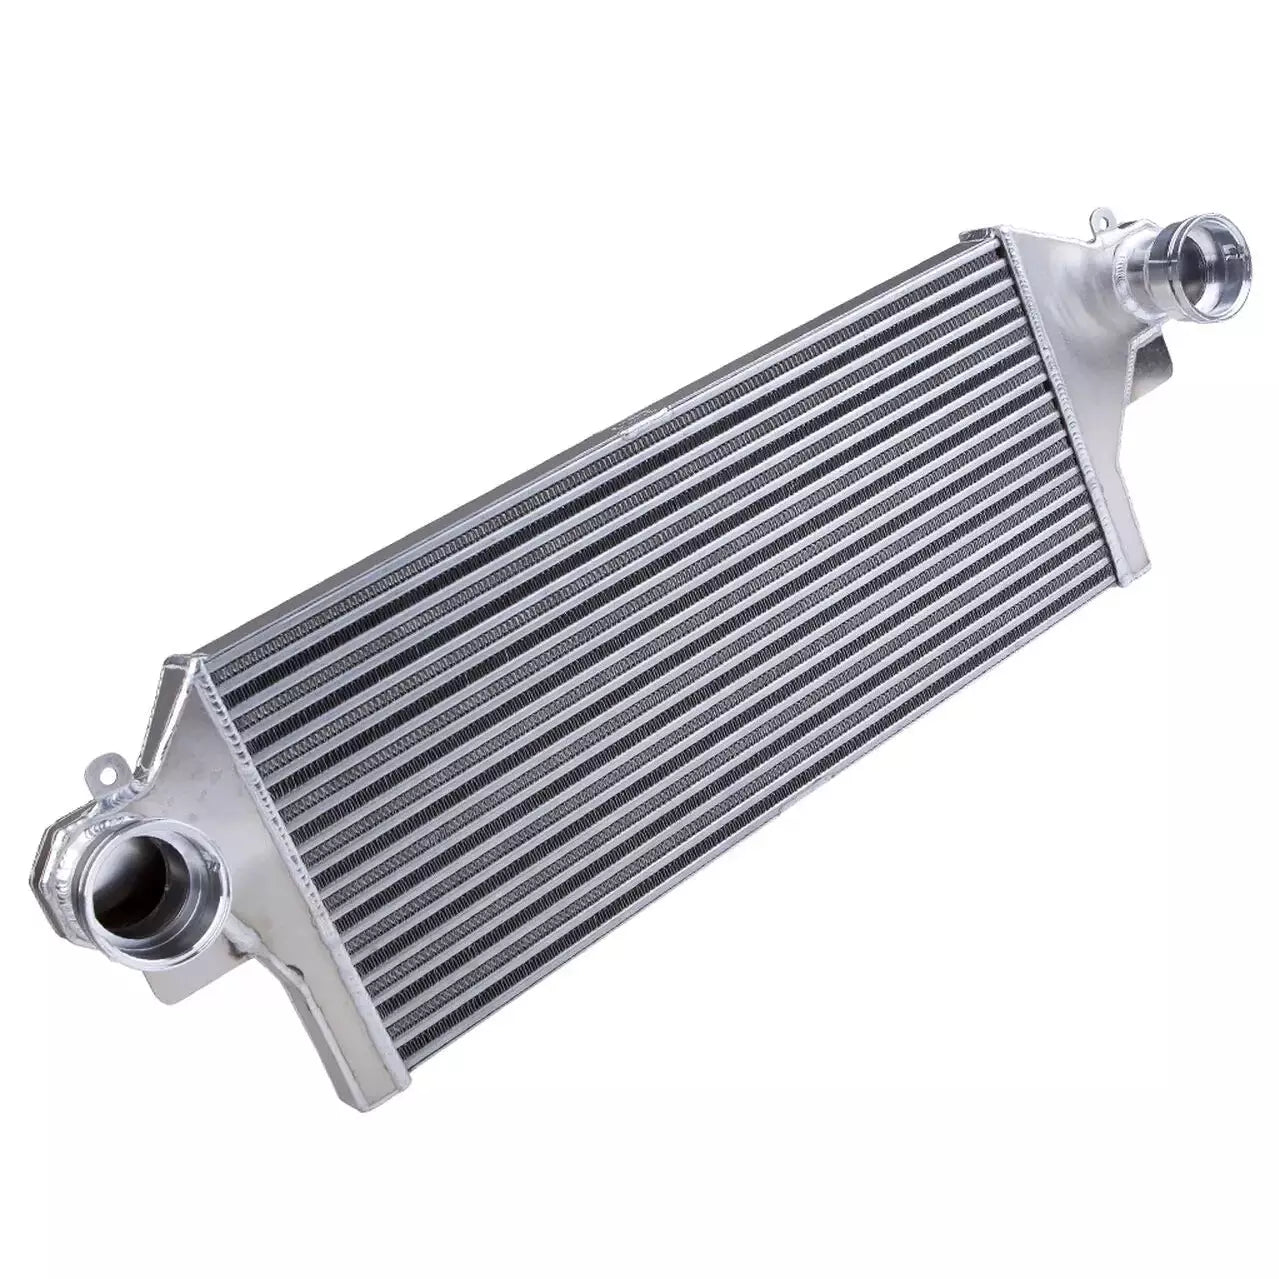 Forge Intercooler for VW